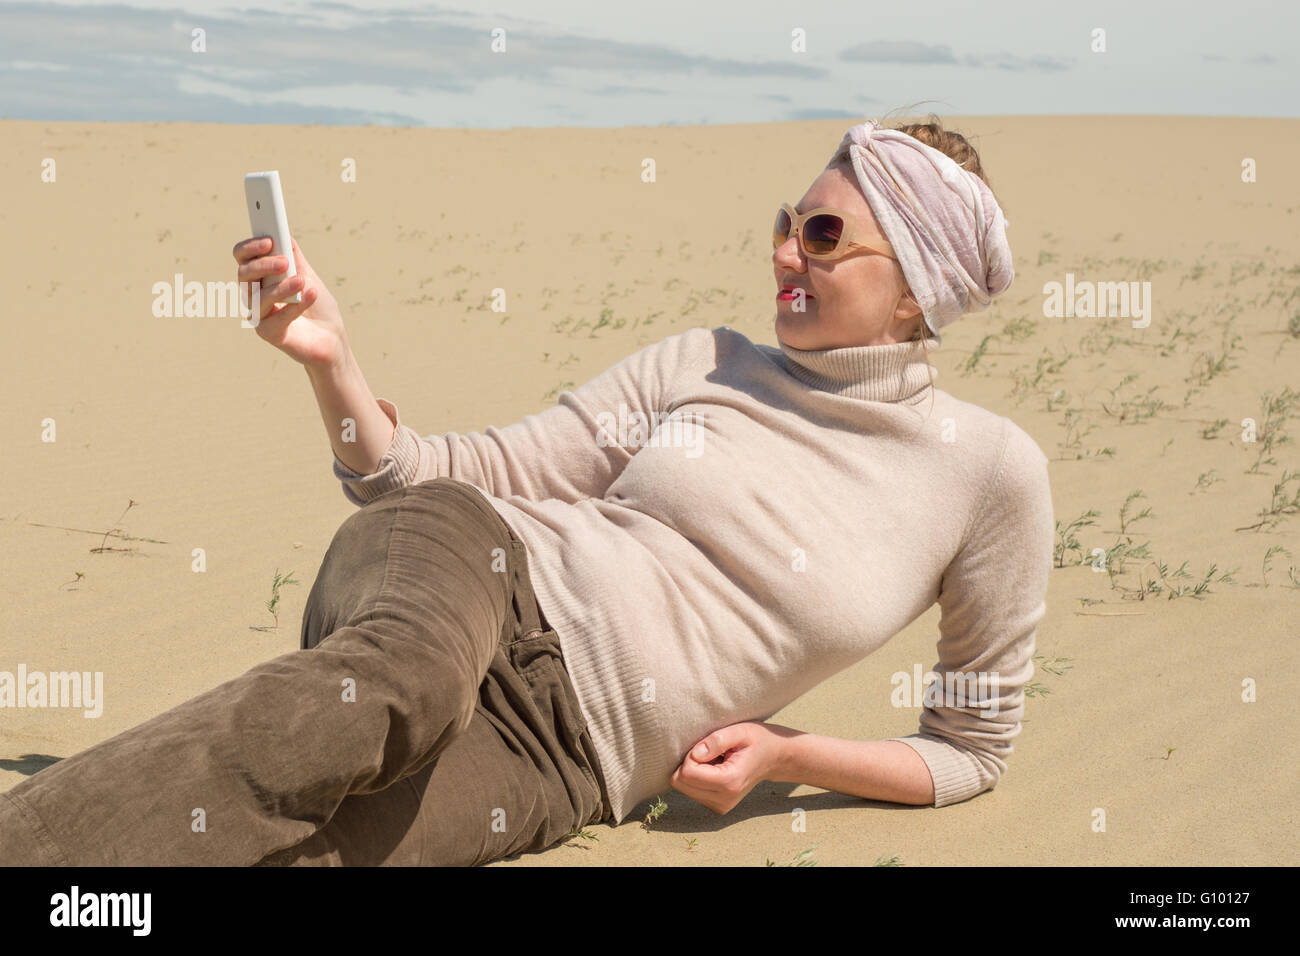 Woman lying on sand and looking at the smartphone Stock Photo